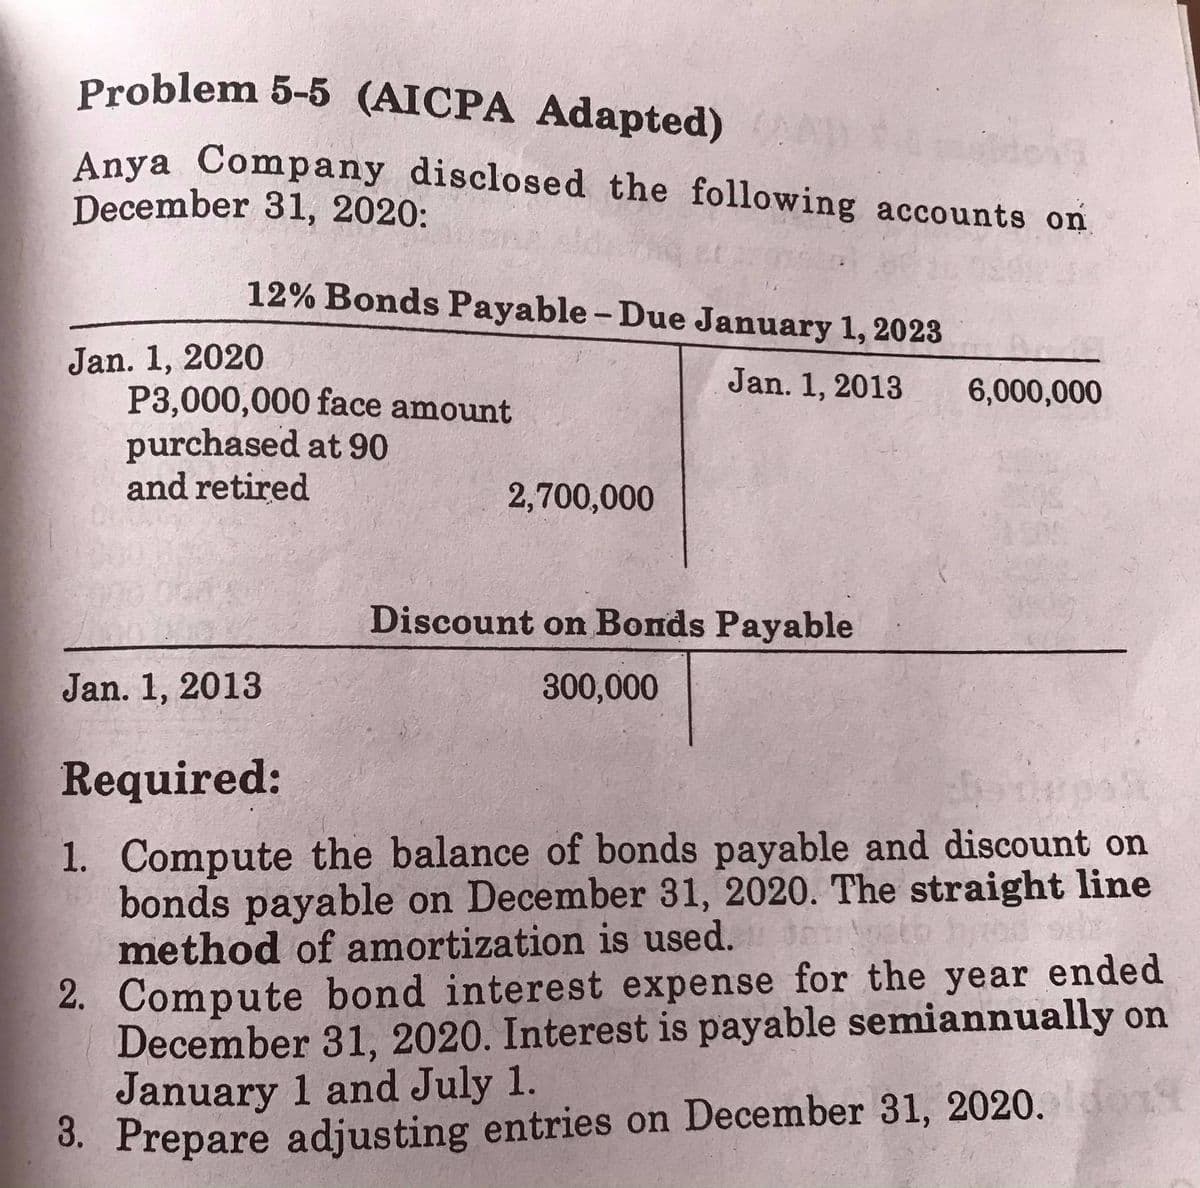 Problem 5-5 (AICPA Adapted)
Anya Company disclosed the following accounts on
December 31, 2020:
12% Bonds Payable- Due January 1, 2023
Jan. 1, 2020
P3,000,000 face amount
purchased at 90
and retired
Jan. 1, 2013
6,000,000
2,700,000
Discount on Bonds Payable
Jan. 1, 2013
300,000
Required:
1. Compute the balance of bonds payable and discount on
bonds payable on December 31, 2020. The straight line
method of amortization is used.
2. Compute bond interest expense for the year ended
December 31, 2020. Interest is payable semiannually on
January 1 and July 1.
3. Prepare adjusting entries on December 31, 2020.
